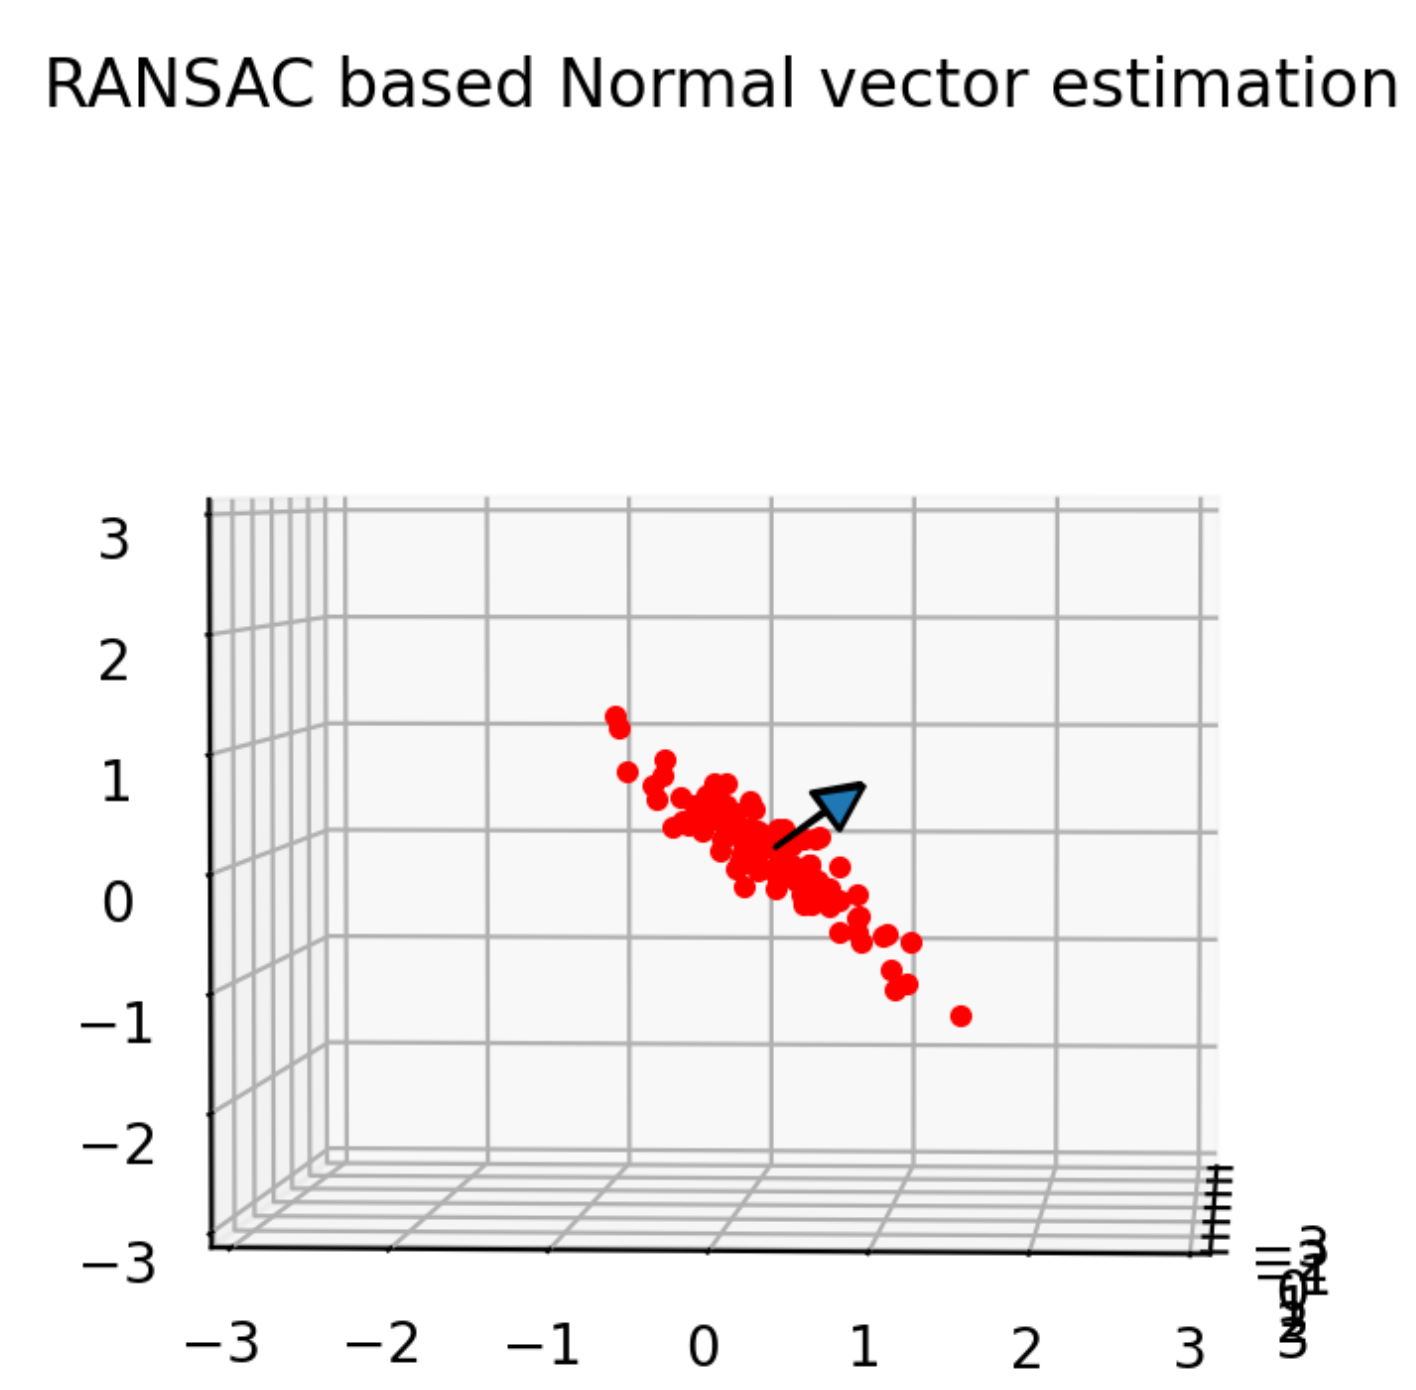 ../../../_images/ransac_normal_vector_estimation.png